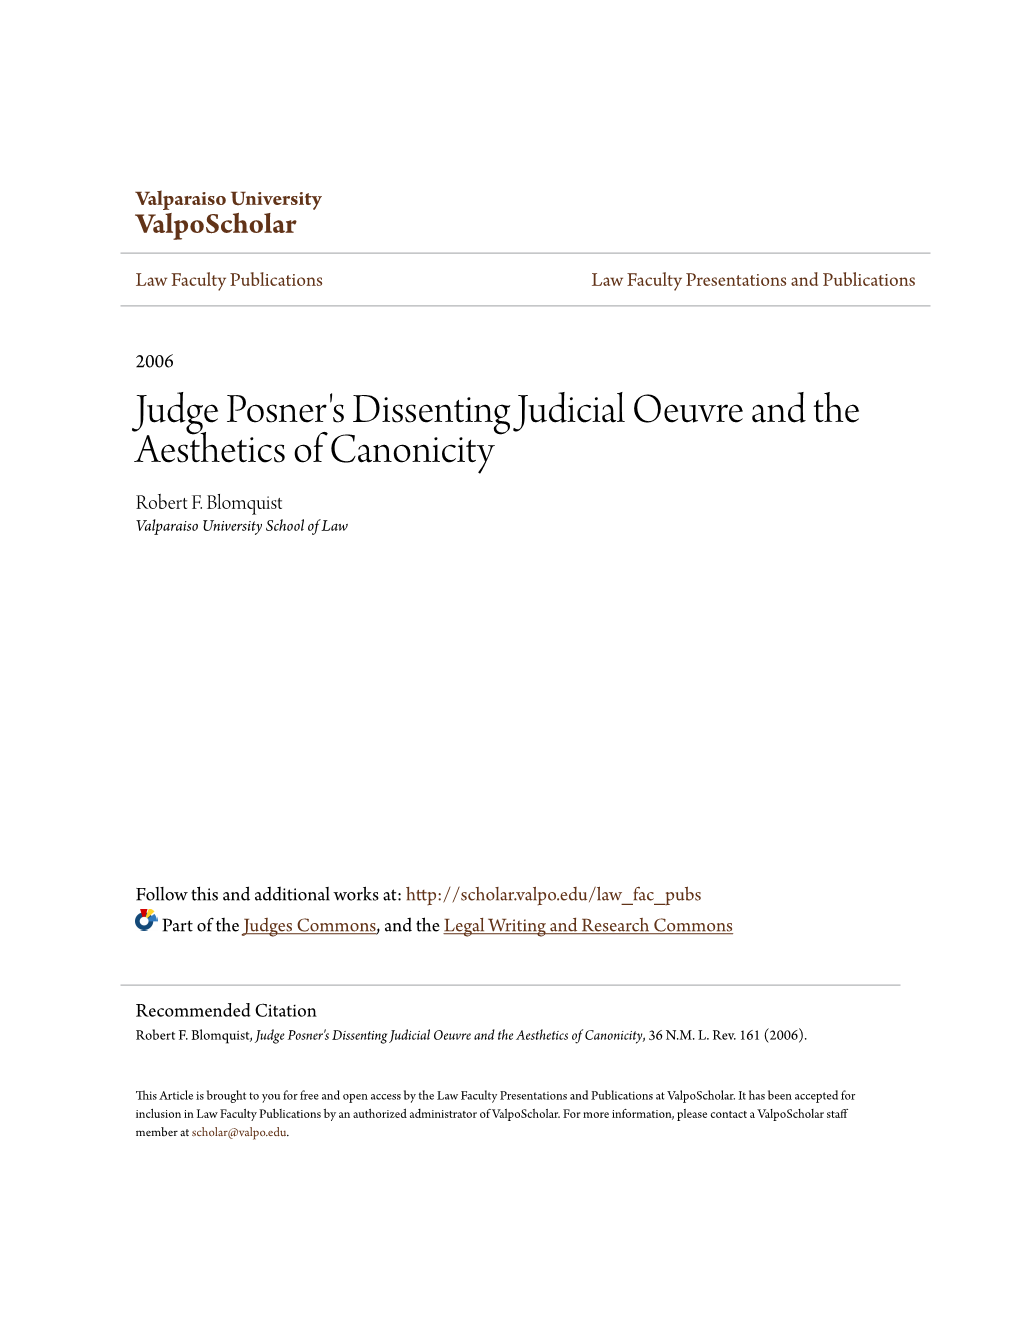 Judge Posner's Dissenting Judicial Oeuvre and the Aesthetics of Canonicity Robert F